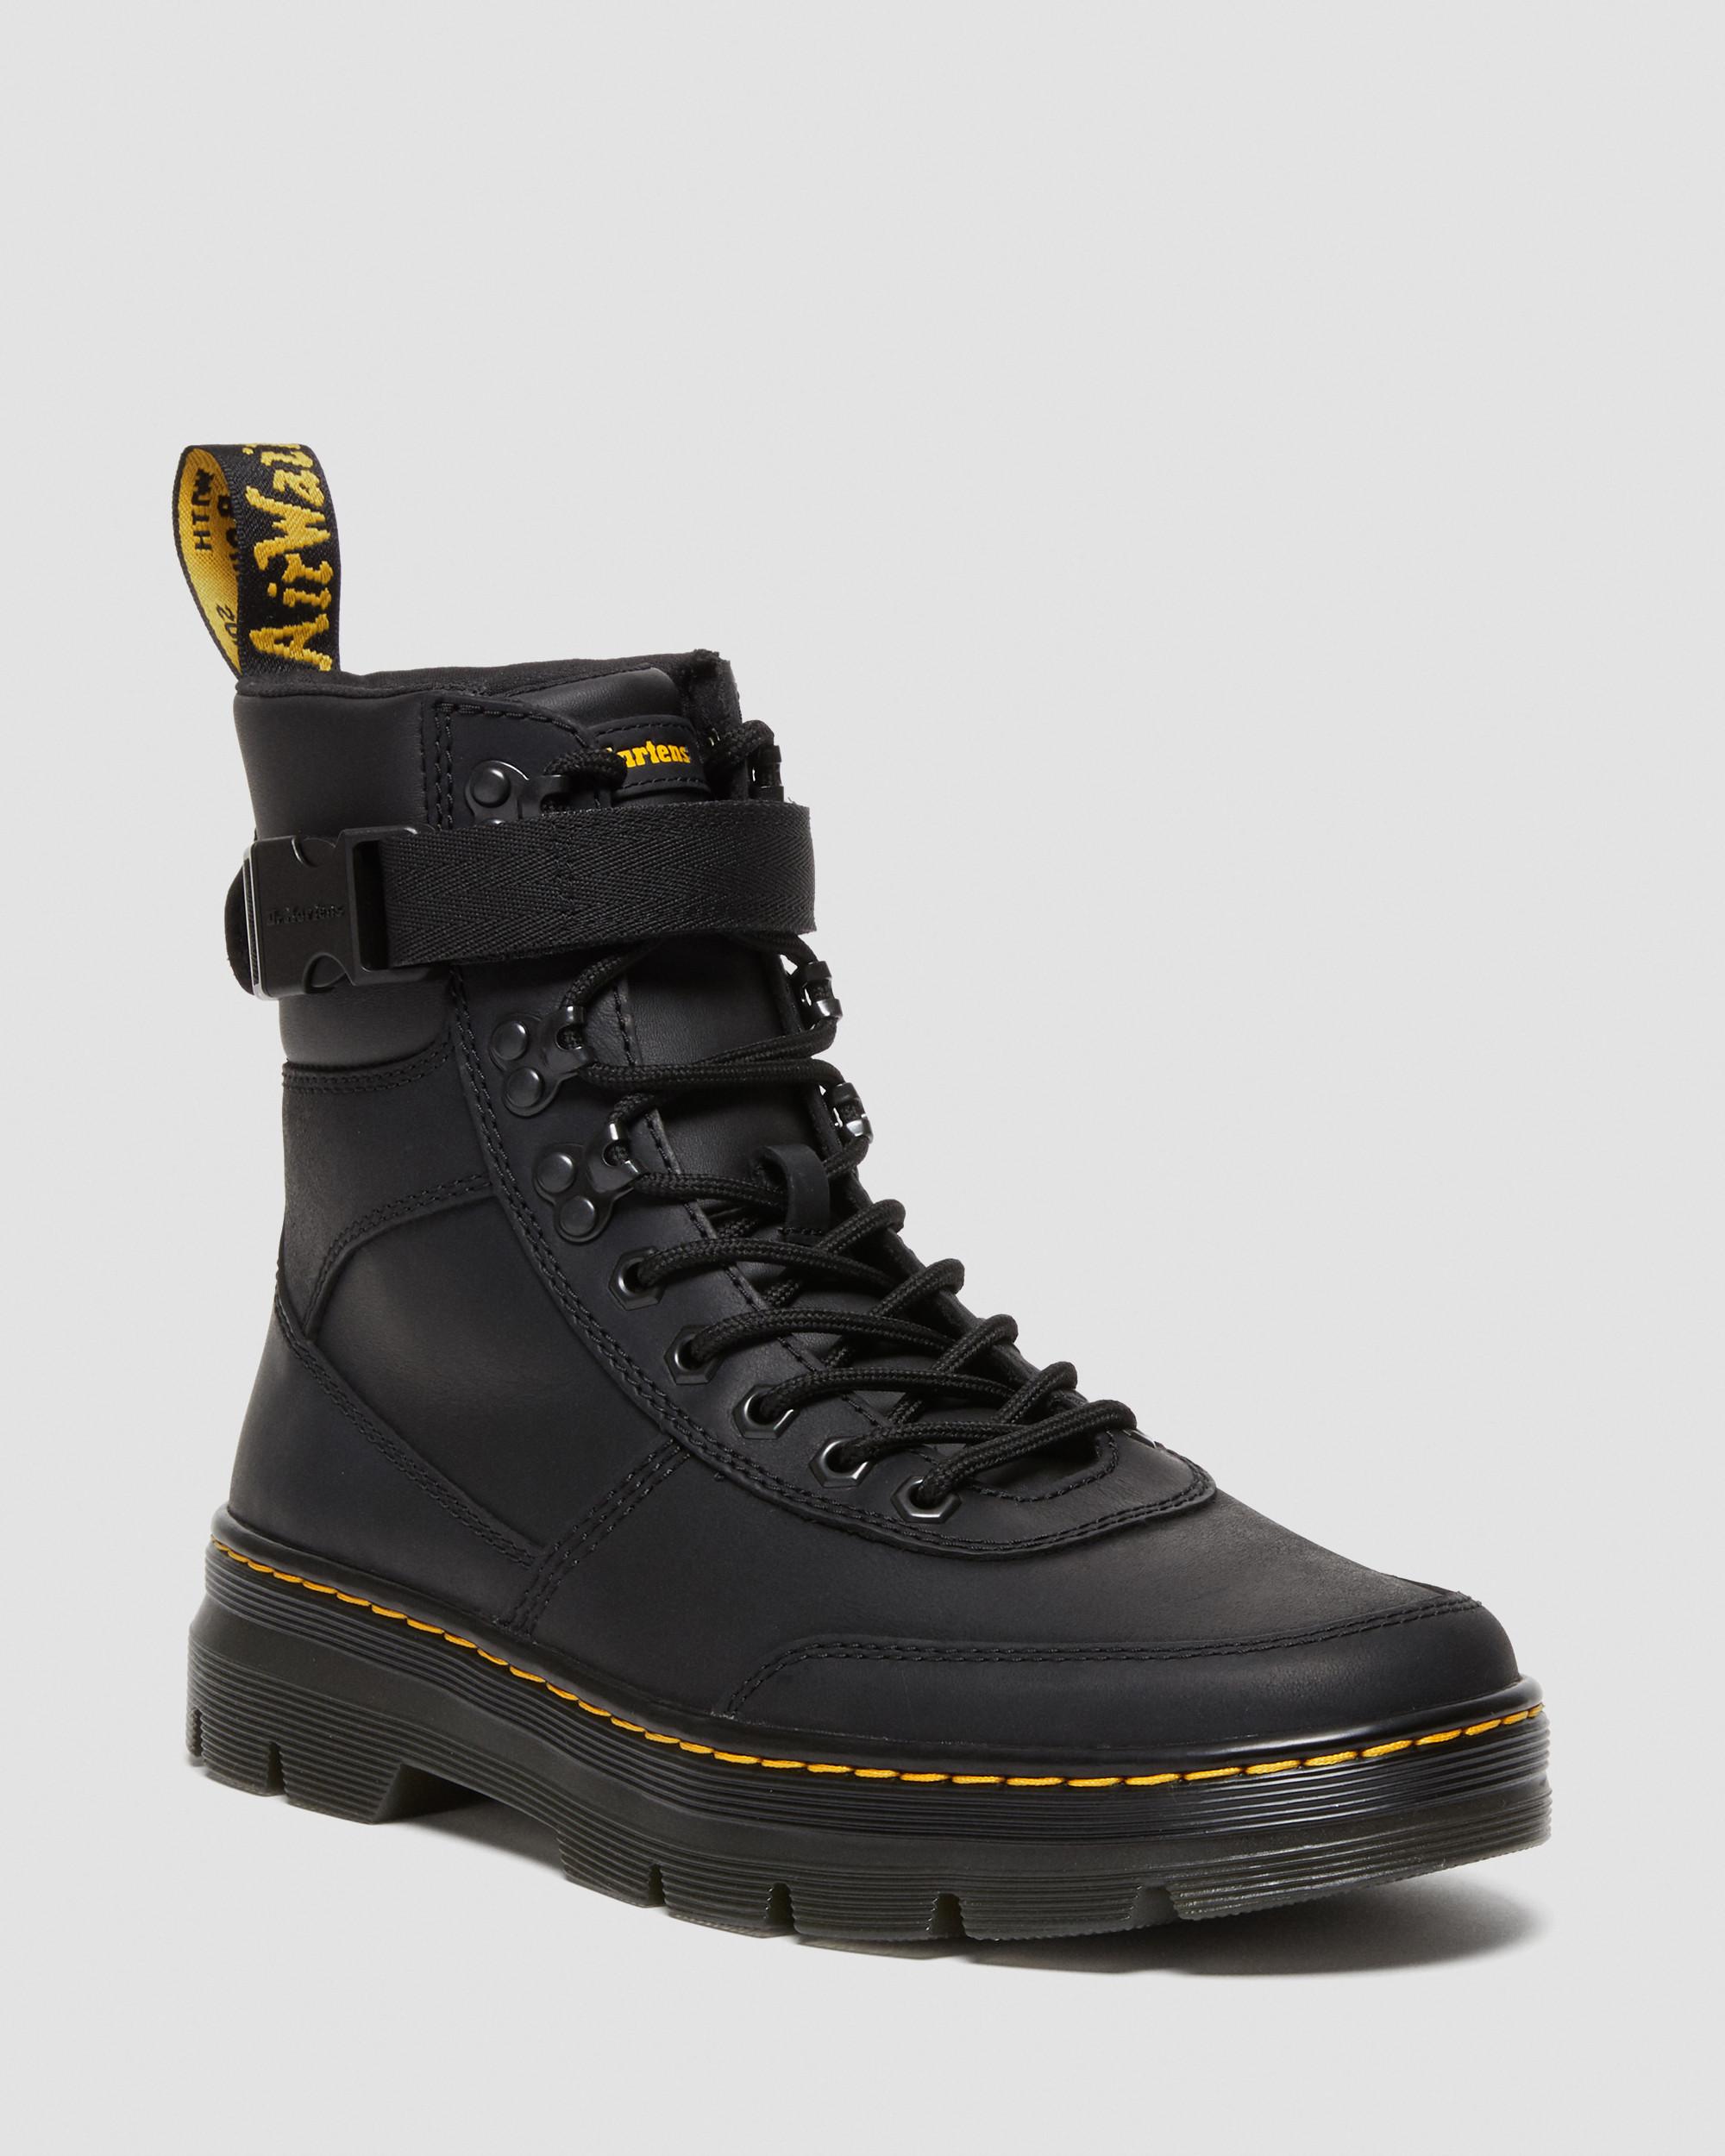 Combs Tech Wyoming Leather Casual Dr. | in Boots Martens Black